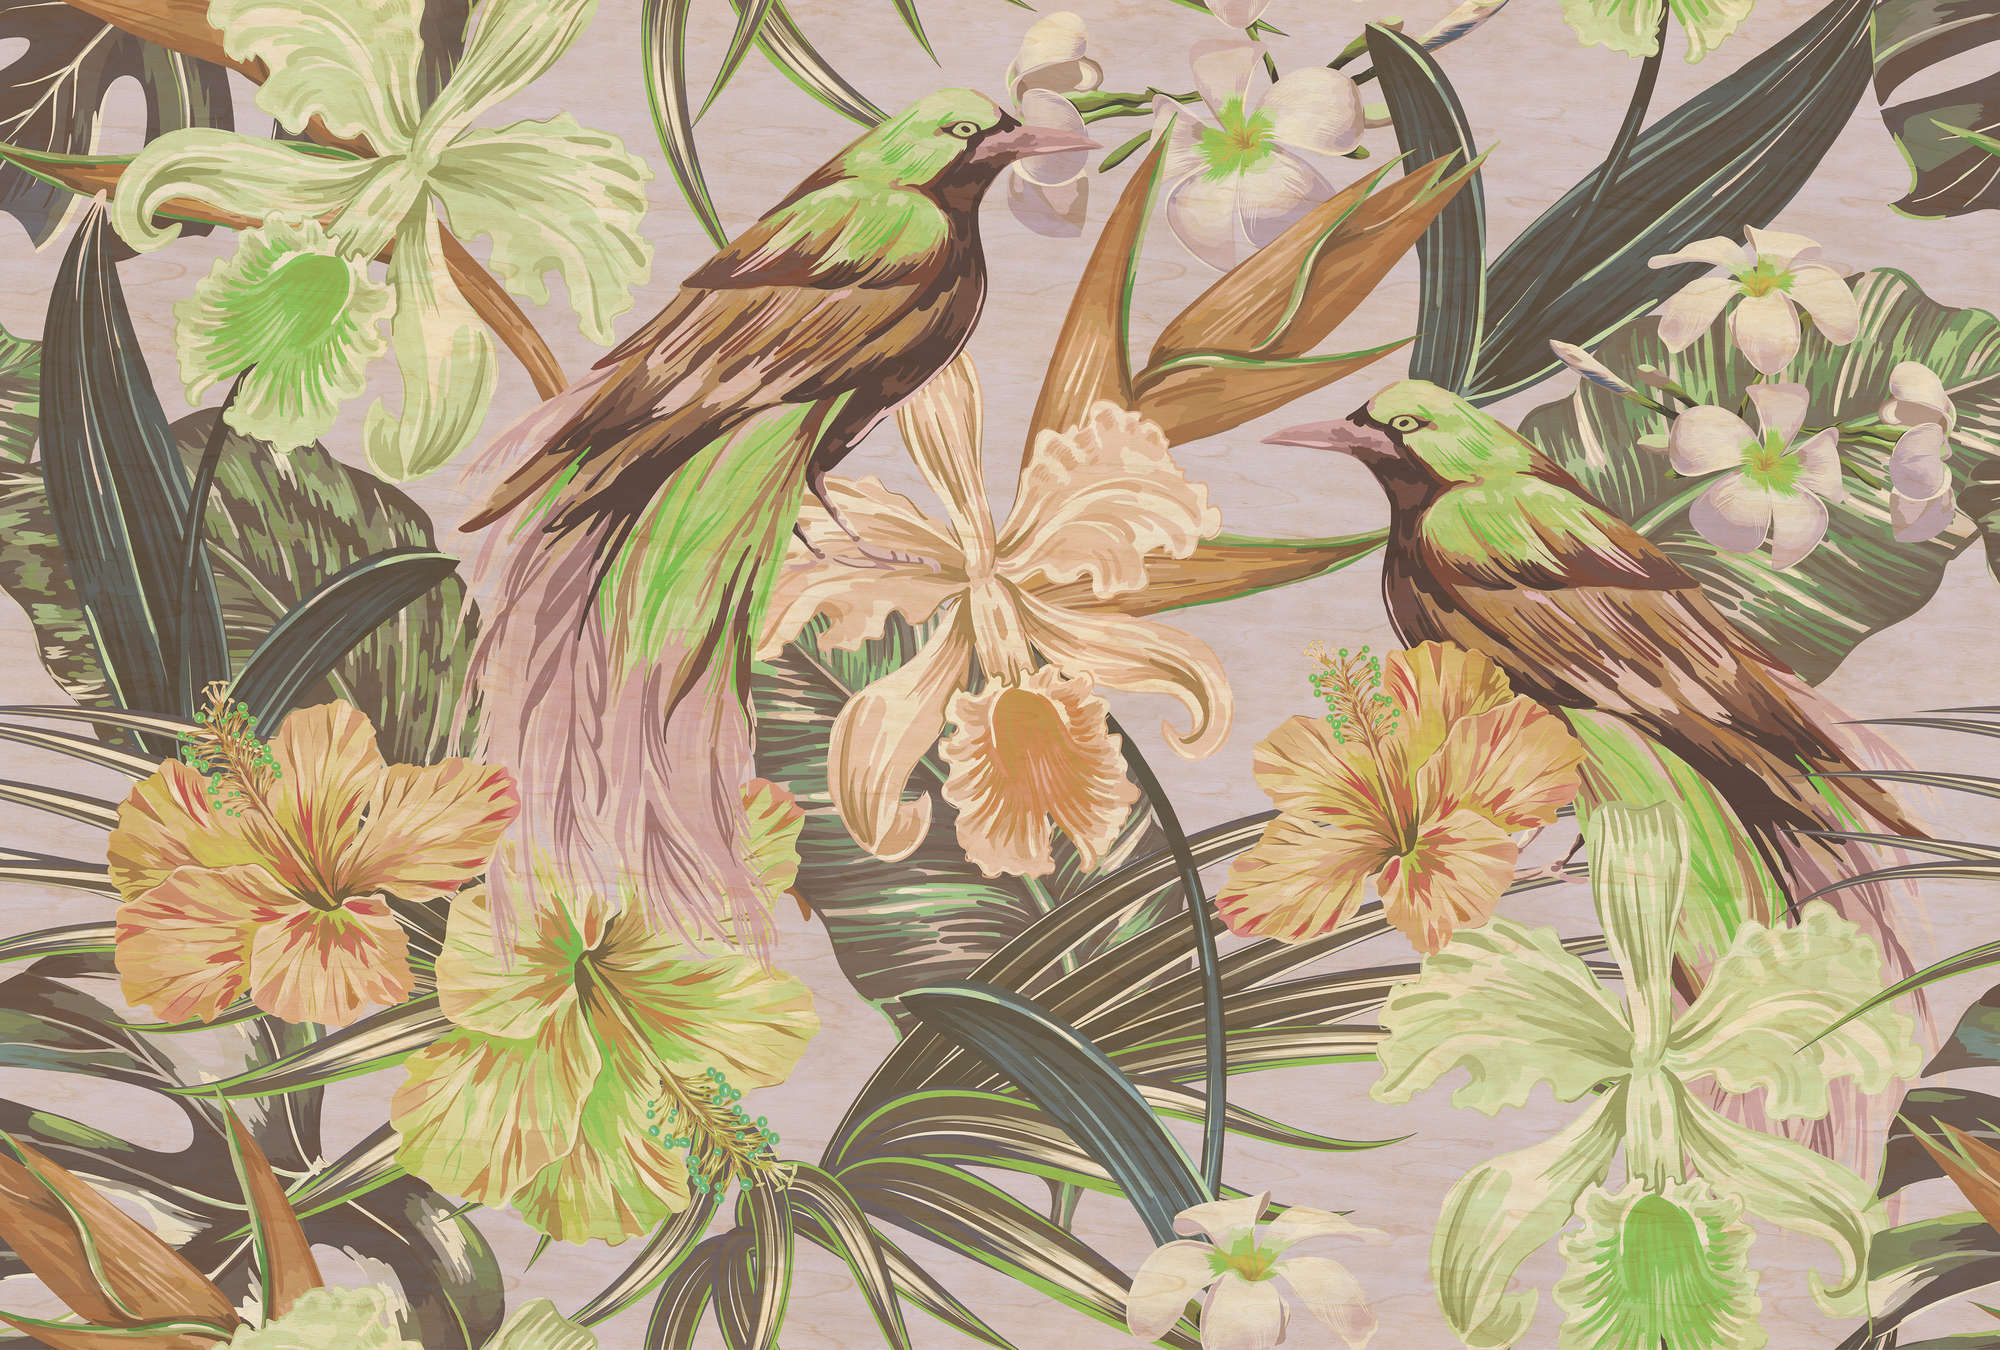             Exotic birds 2 - Photo wallpaper exotic birds & plants- Scratch texture - Beige, Green | Pearl smooth non-woven
        